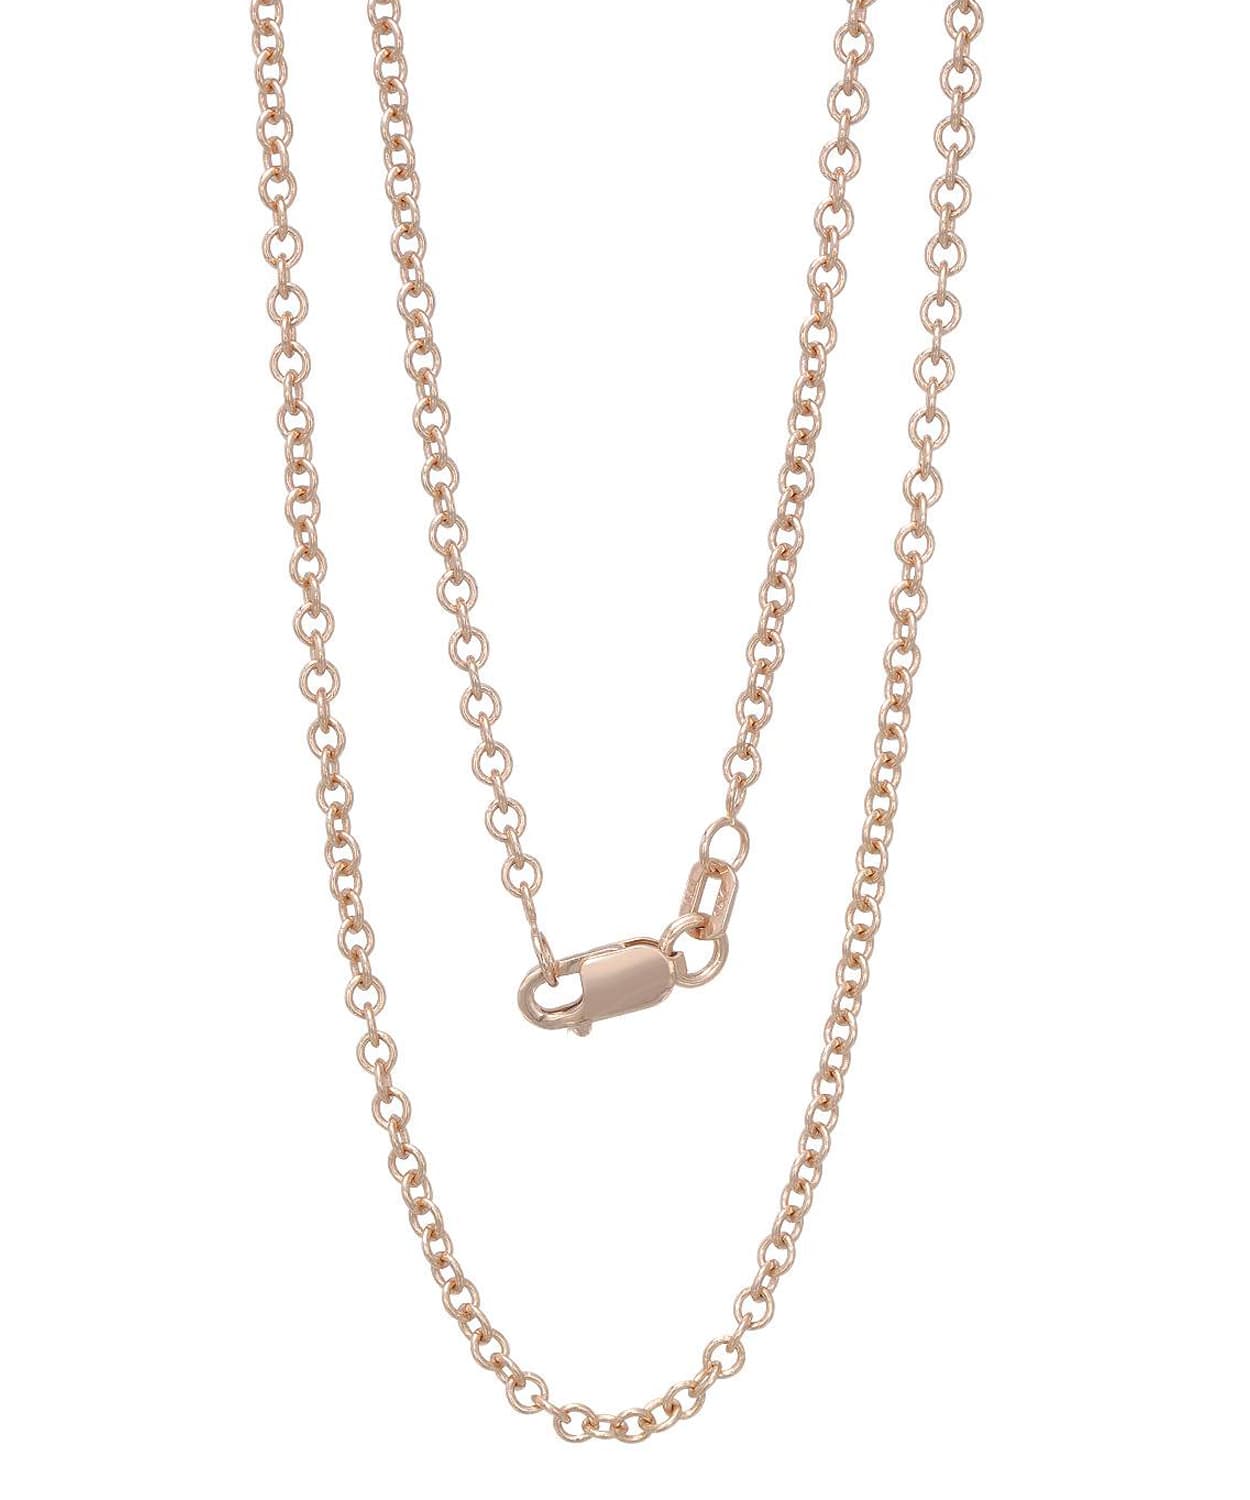 ESEMCO 2.1mm 14K Rose Gold Rolo Chain View 2